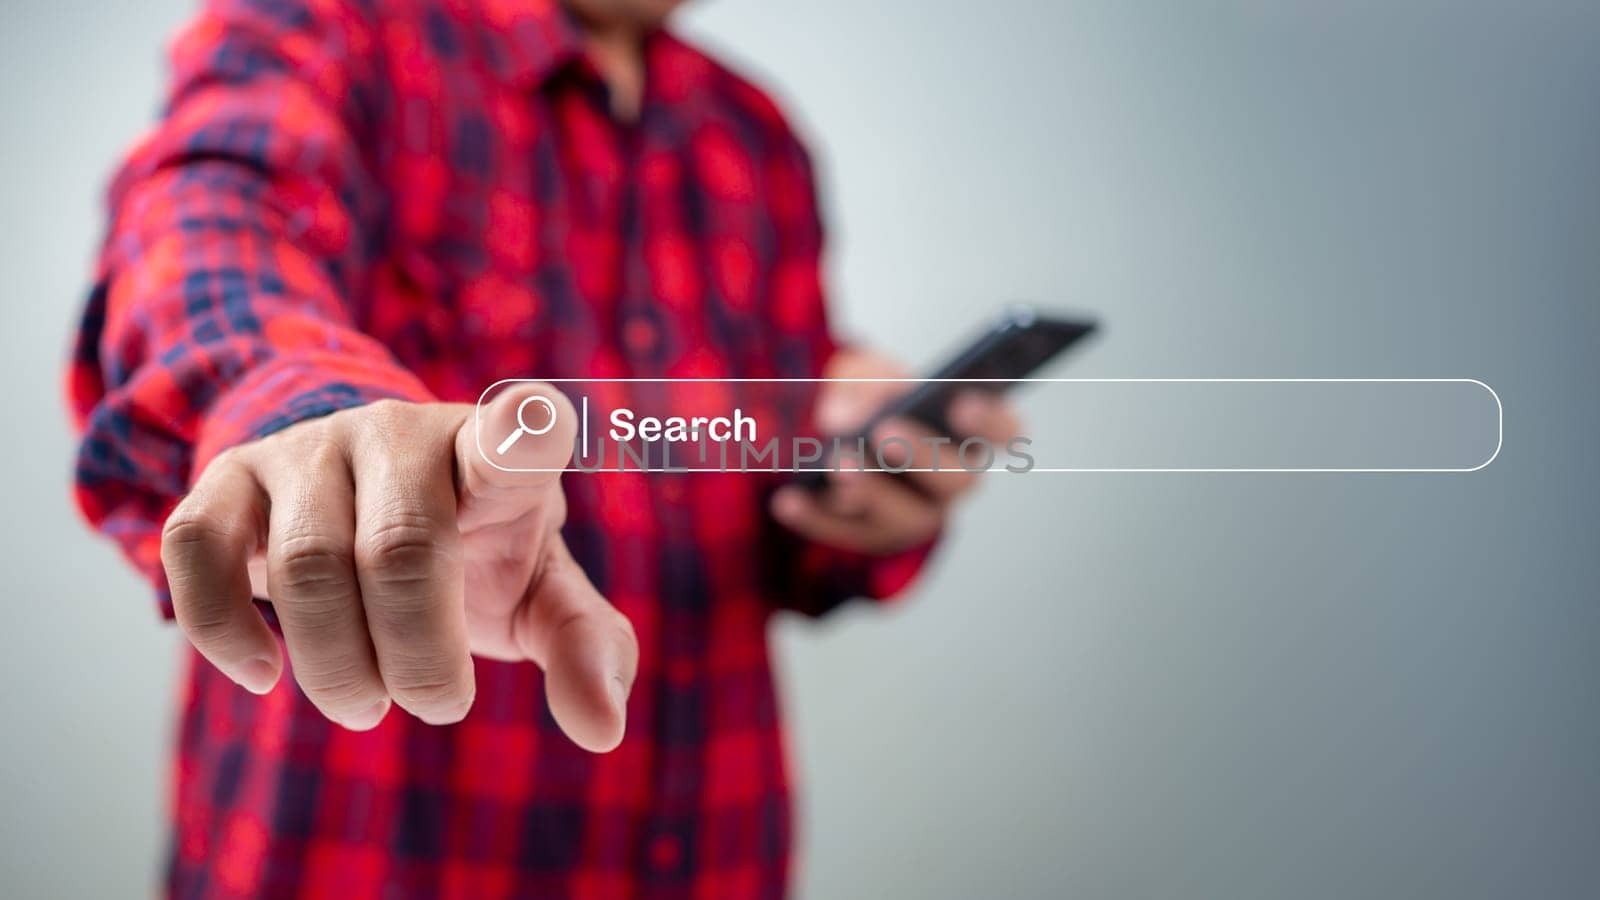 Man use cell phone to search data on internet finding information Website online, Search Engine Optimization, Searching information online, Concept of SEO, Search Engine Optimization.